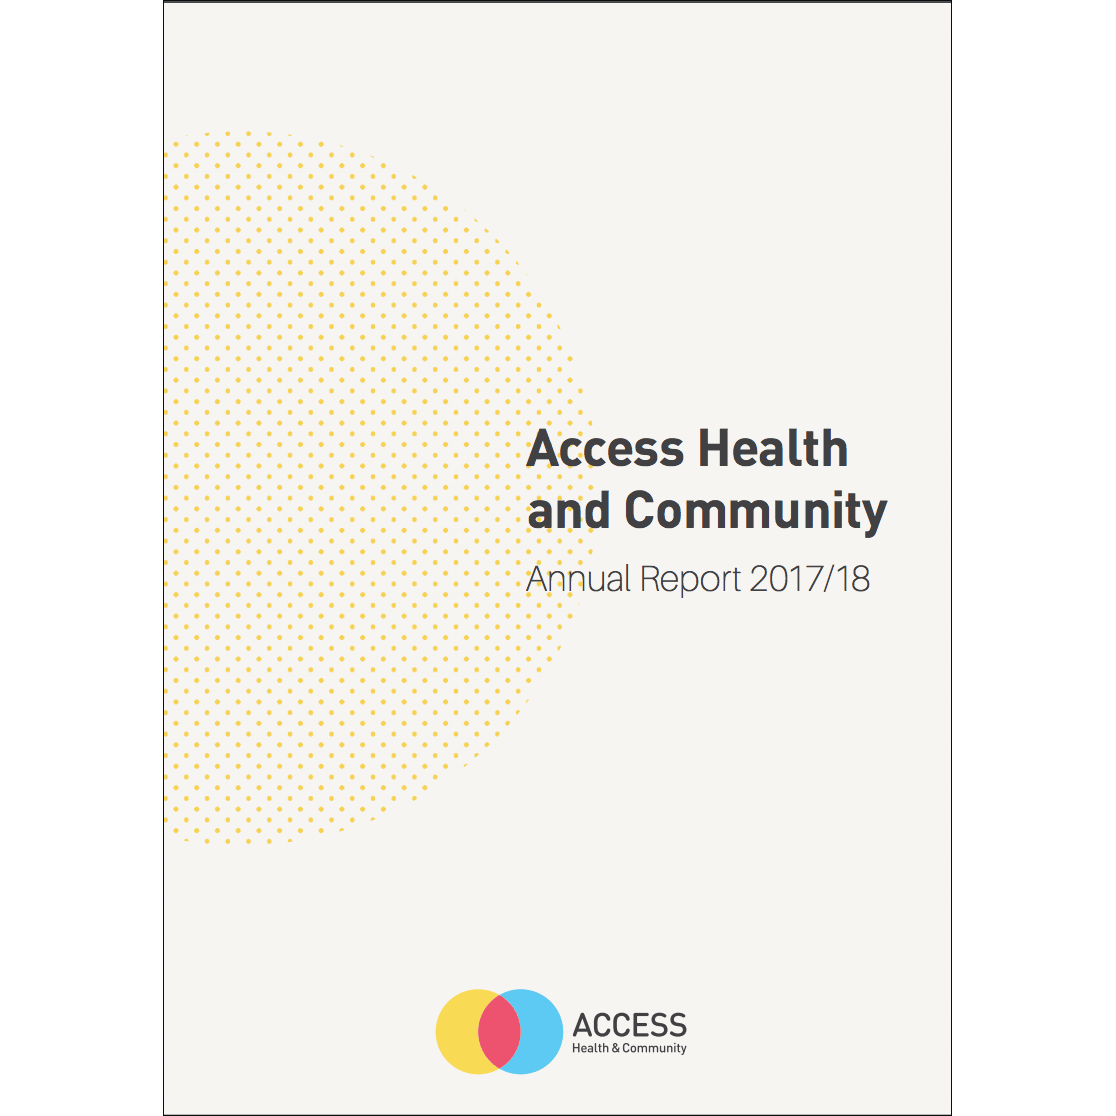 Access Health and Community Annual Report 2017/18